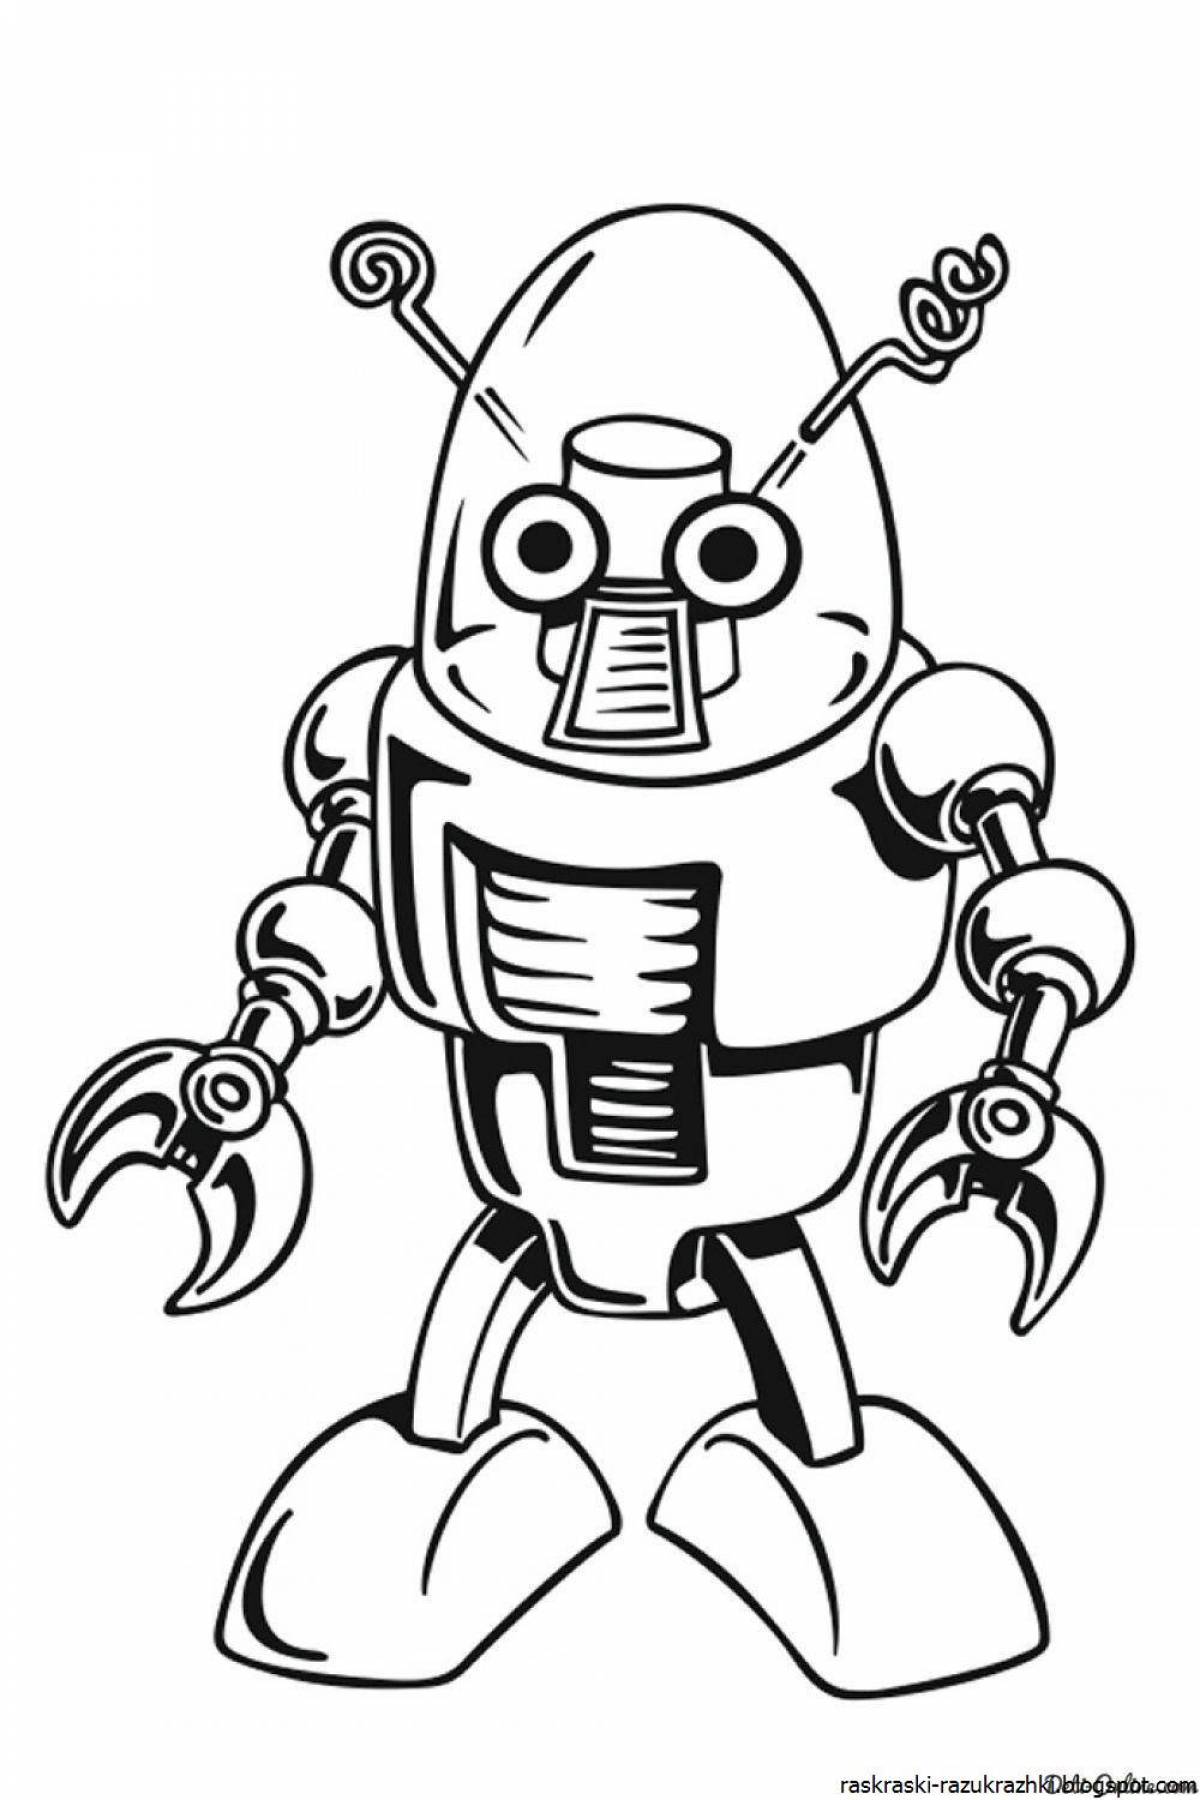 Cute robot coloring book for 3-4 year olds